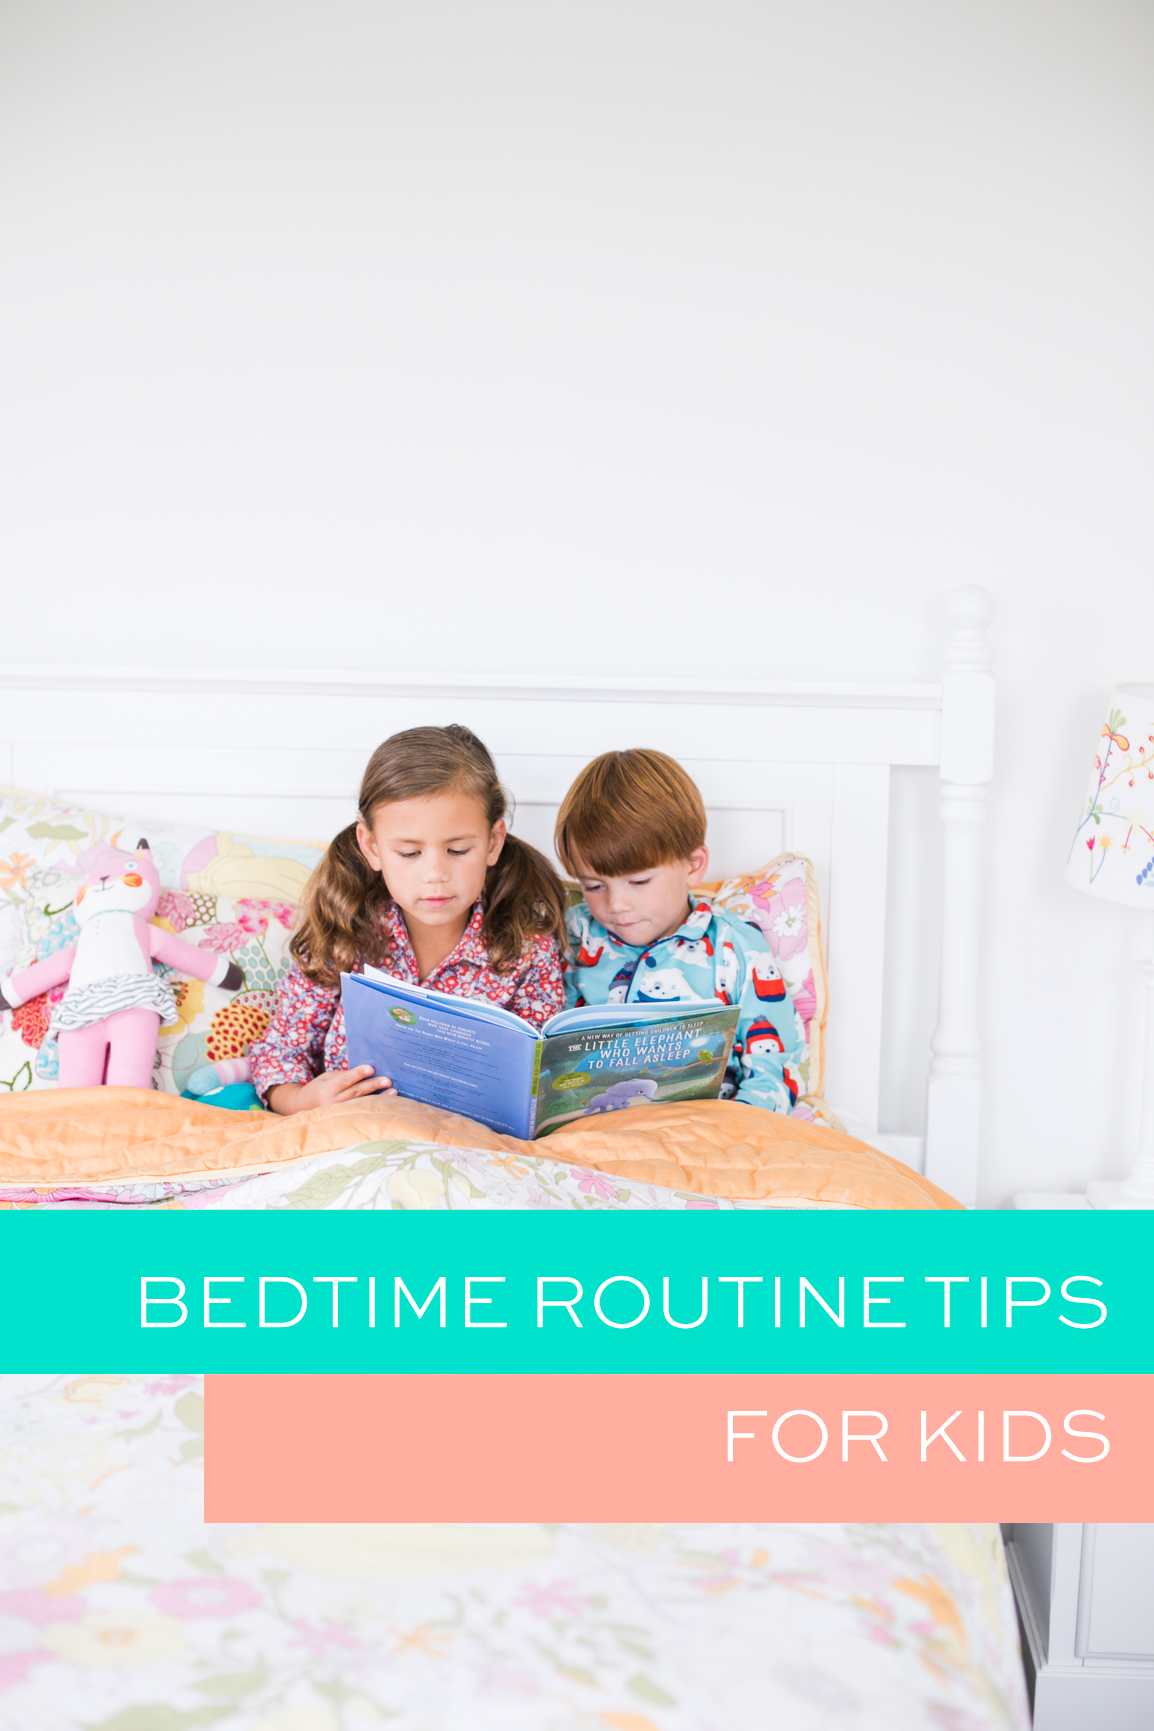 Bedtime Routine Tips for Kids